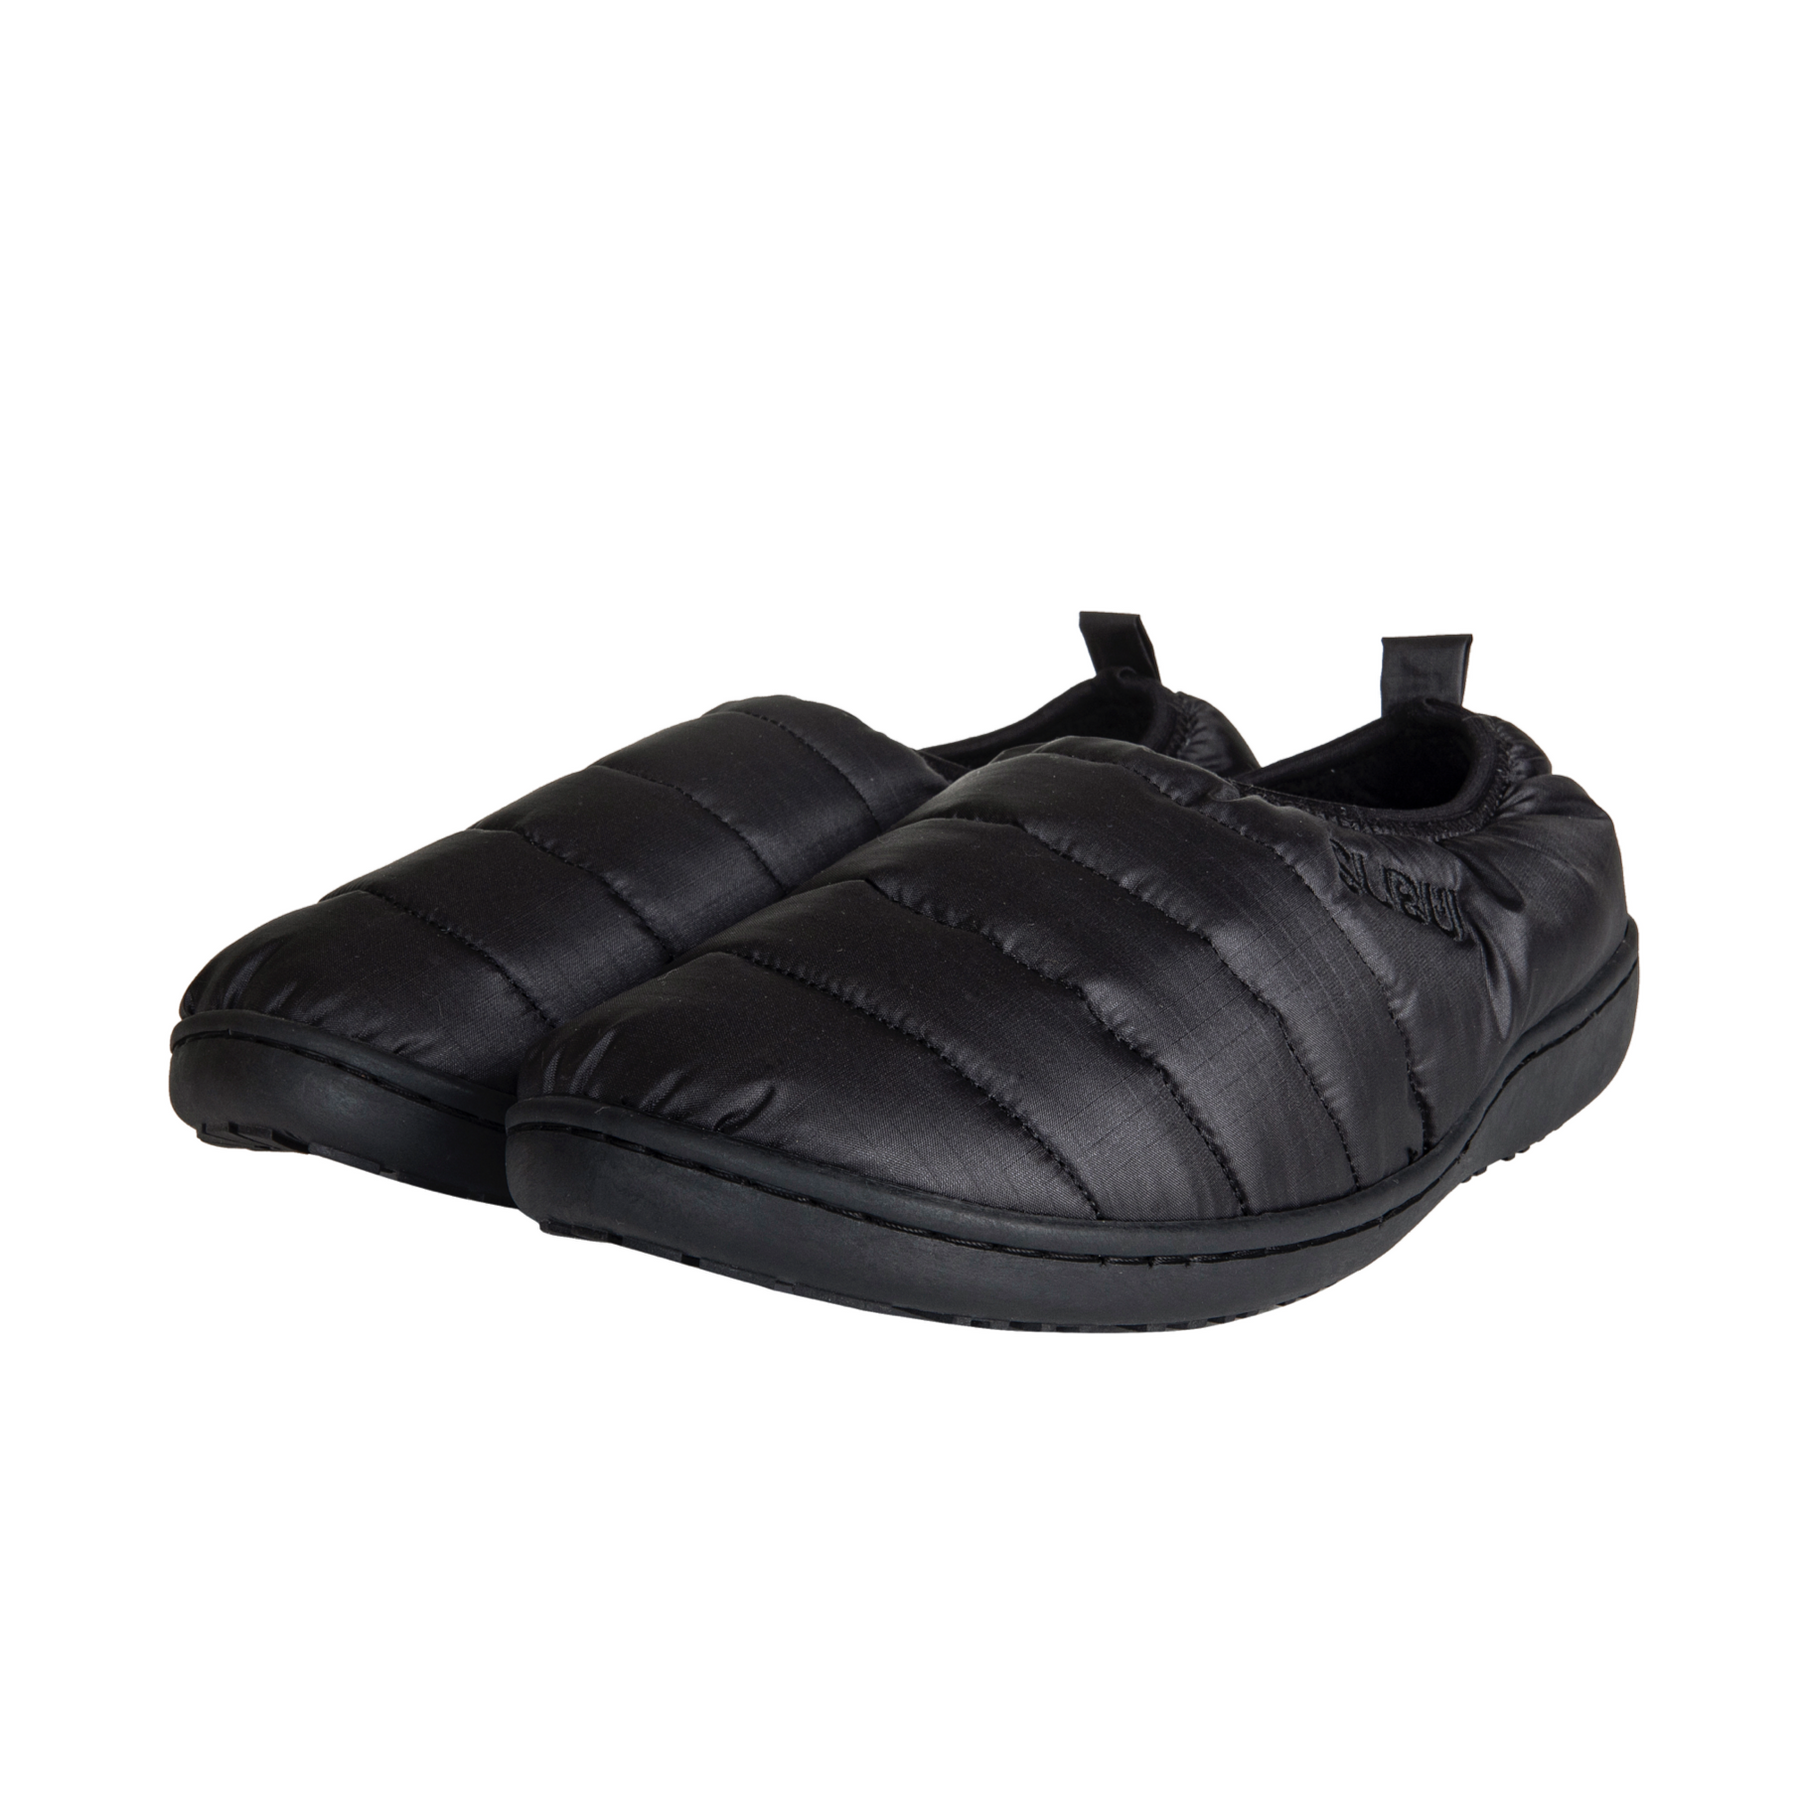 SUBU, Packable Slippers Gloss Black, Slippers,